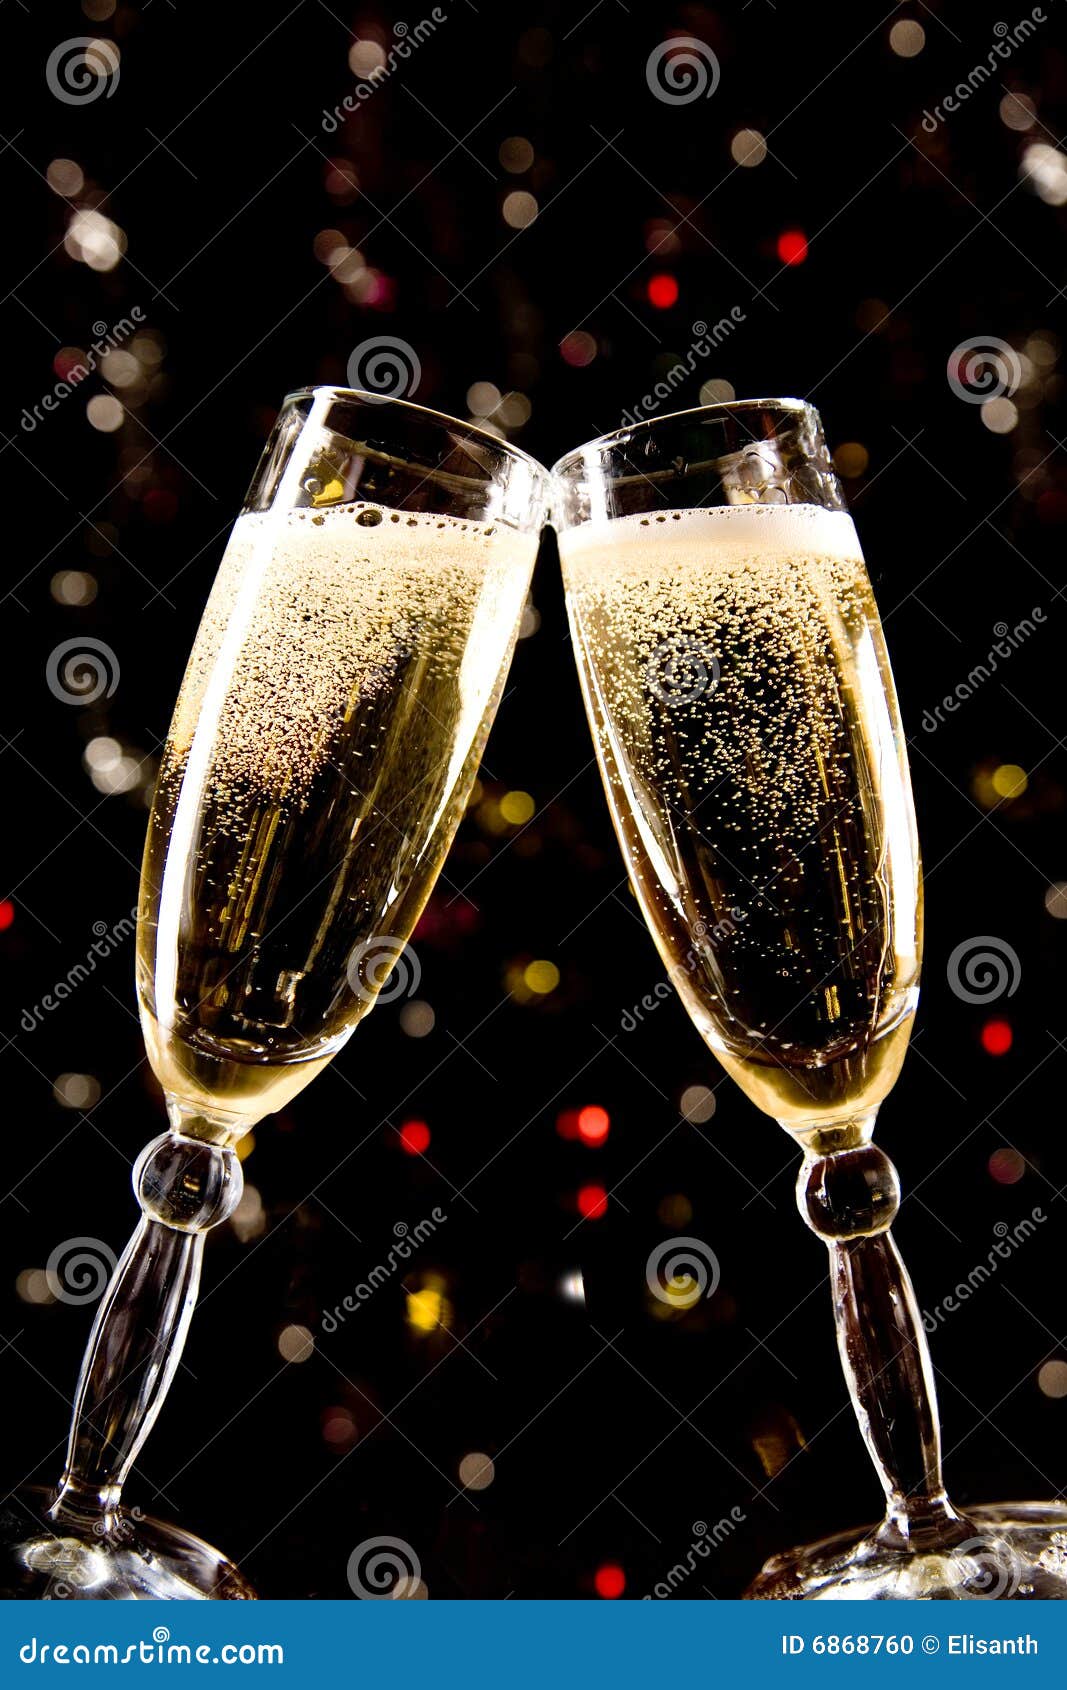 https://thumbs.dreamstime.com/z/two-champagne-glasses-making-toast-6868760.jpg